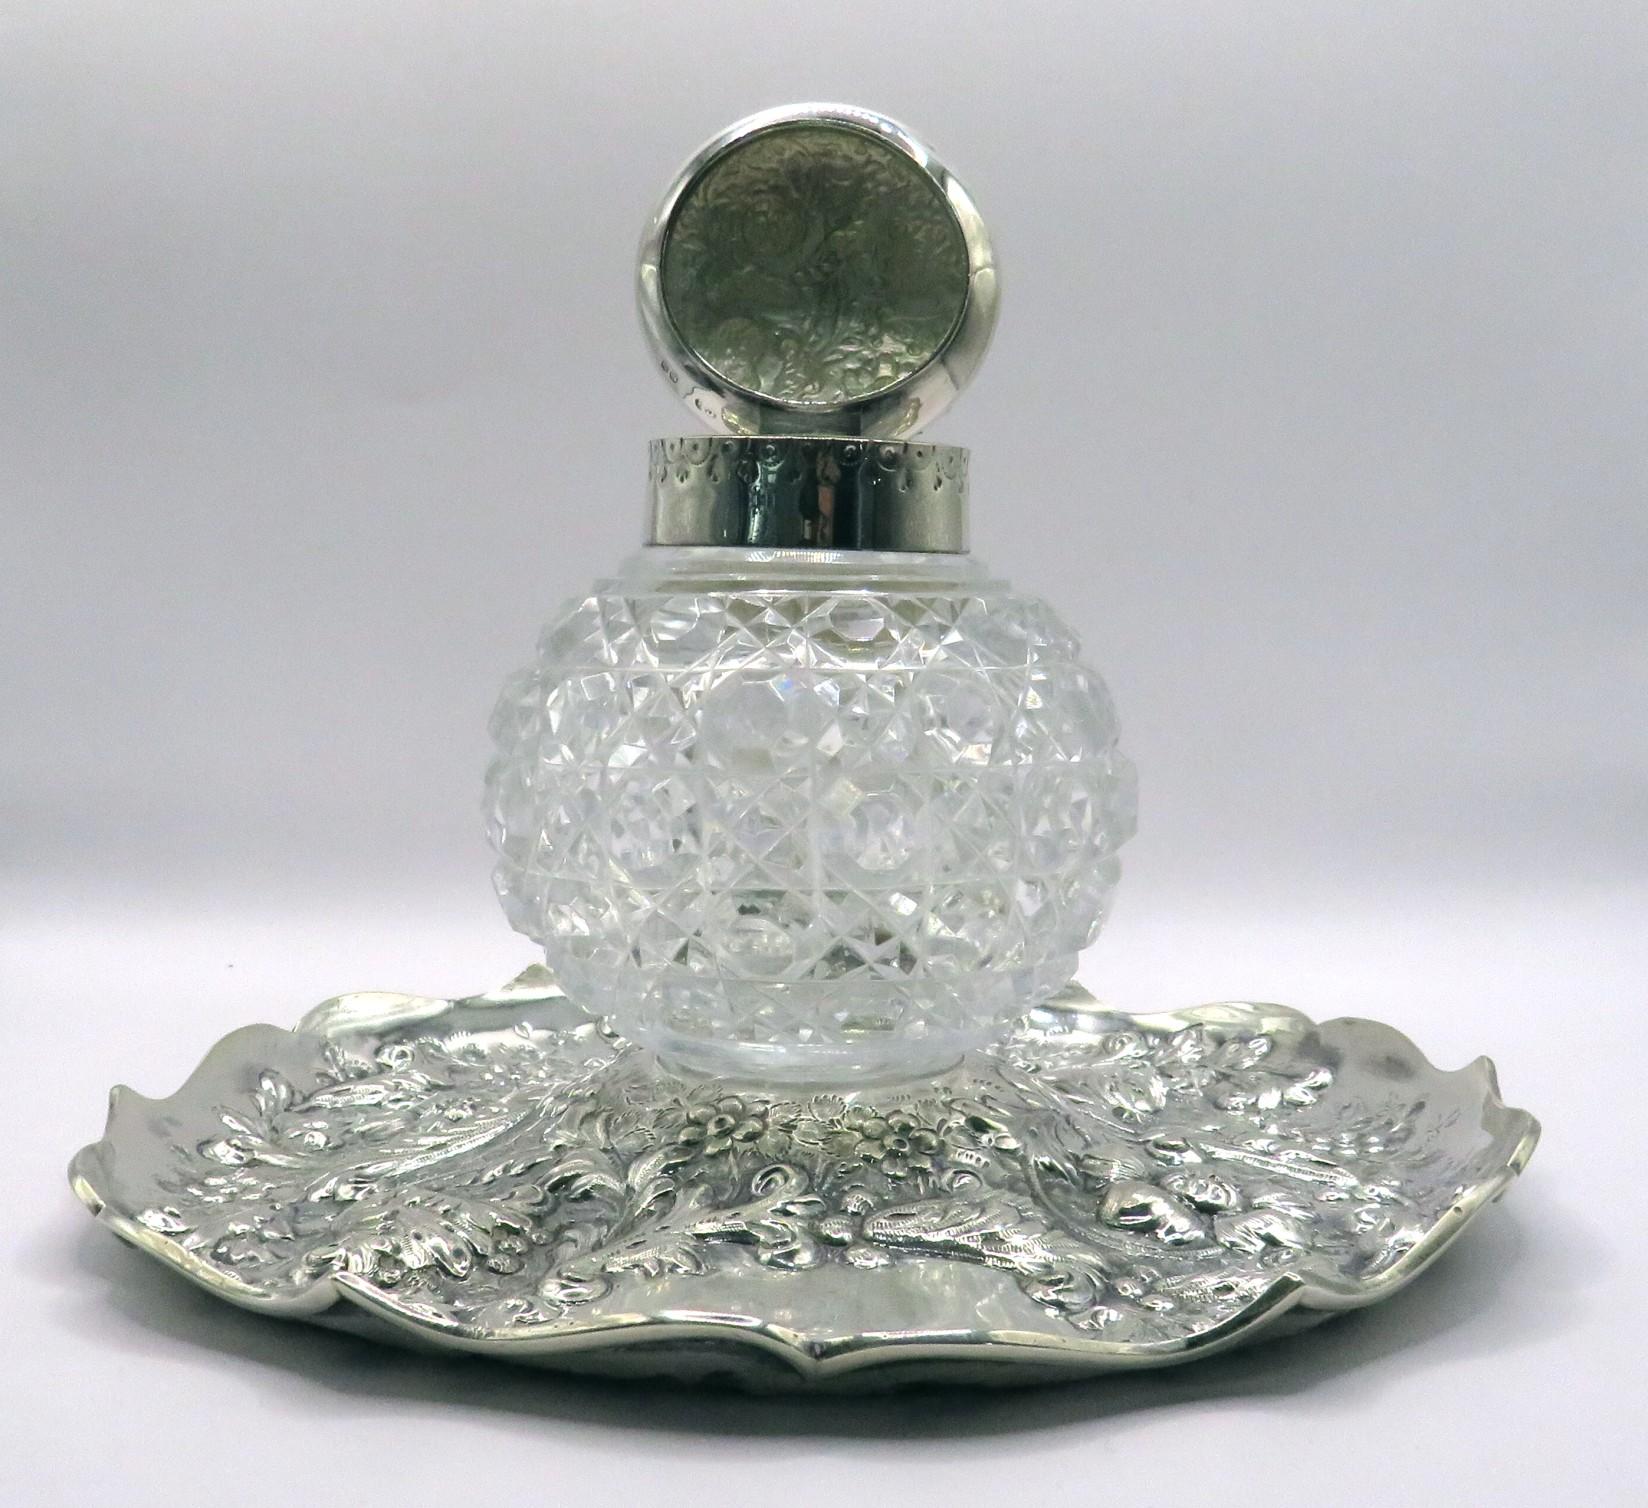 The robust globular shaped & cut glass body is fitted with a sterling silver collar & hinged lid, the interior retains its original removable glass reservoir. 
The inkwell sits within its impressively large & heavy sterling silver base, richly